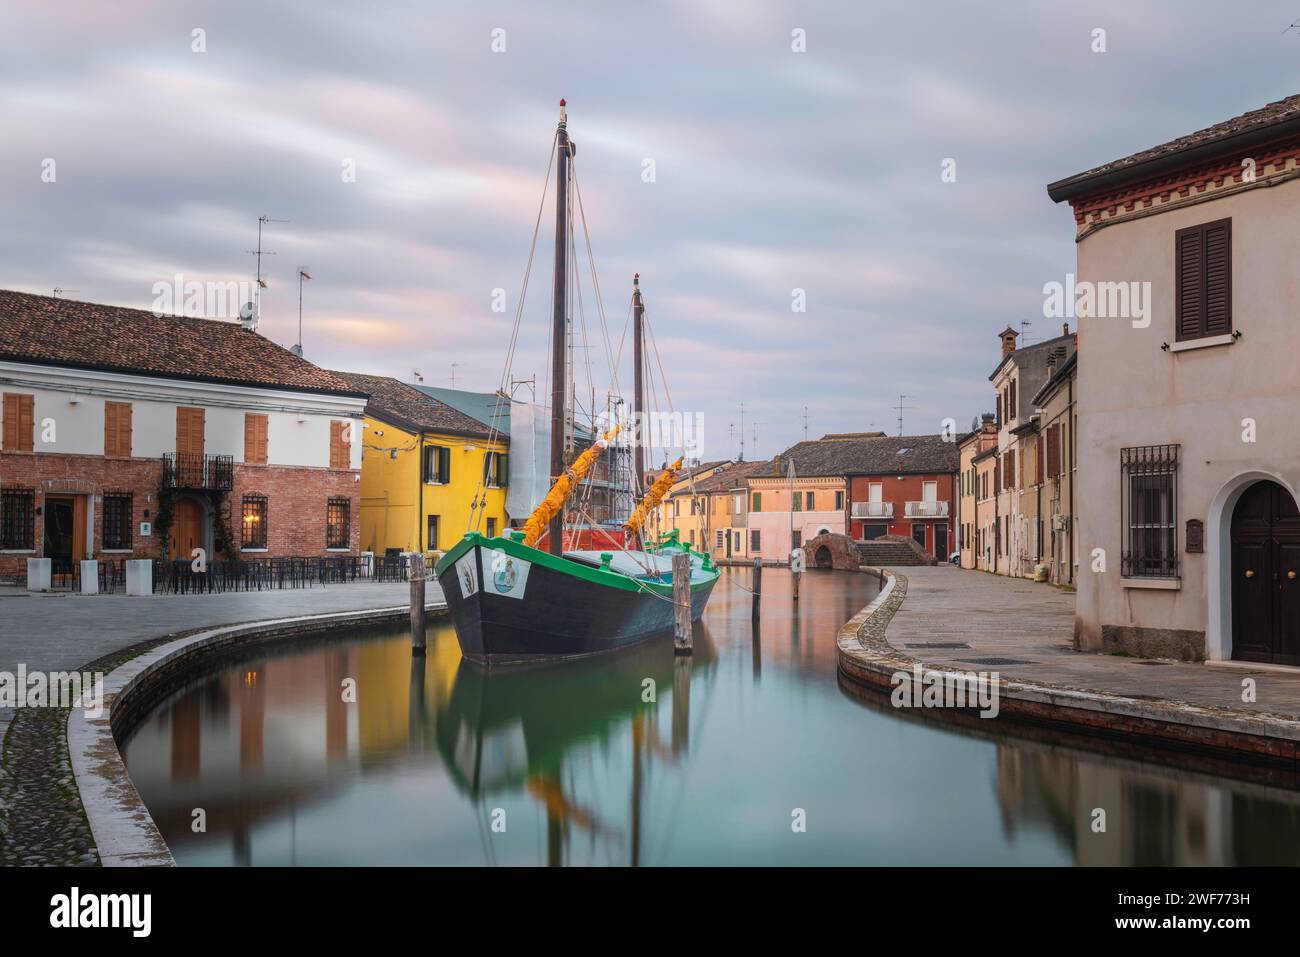 The venetian-style town of Comacchio with its canals and bridges in the province of Ferrara, Emilia-Romagna, Italy. Stock Photo